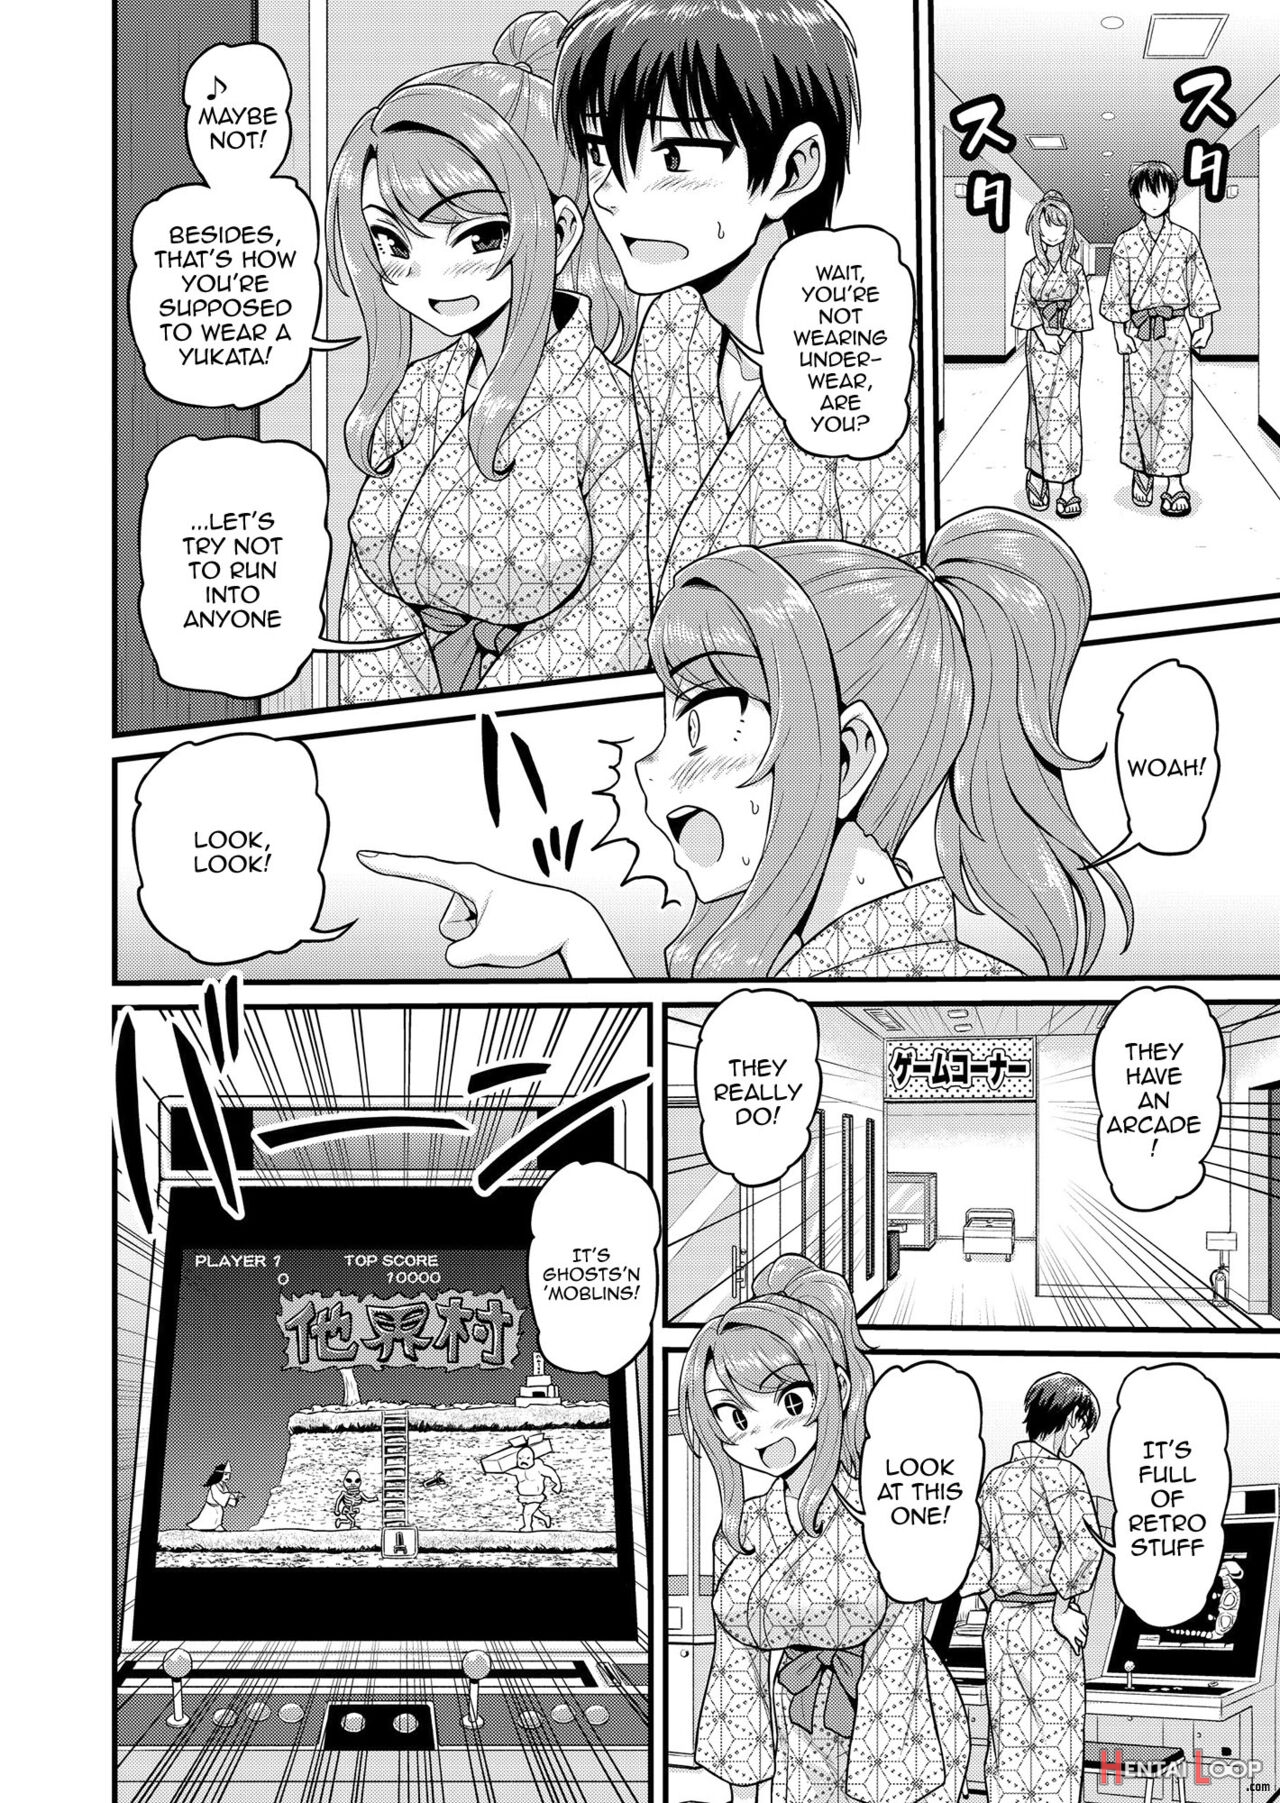 Smashing With Your Gamer Girl Friend At The Hot Spring - Ntr Version page 9